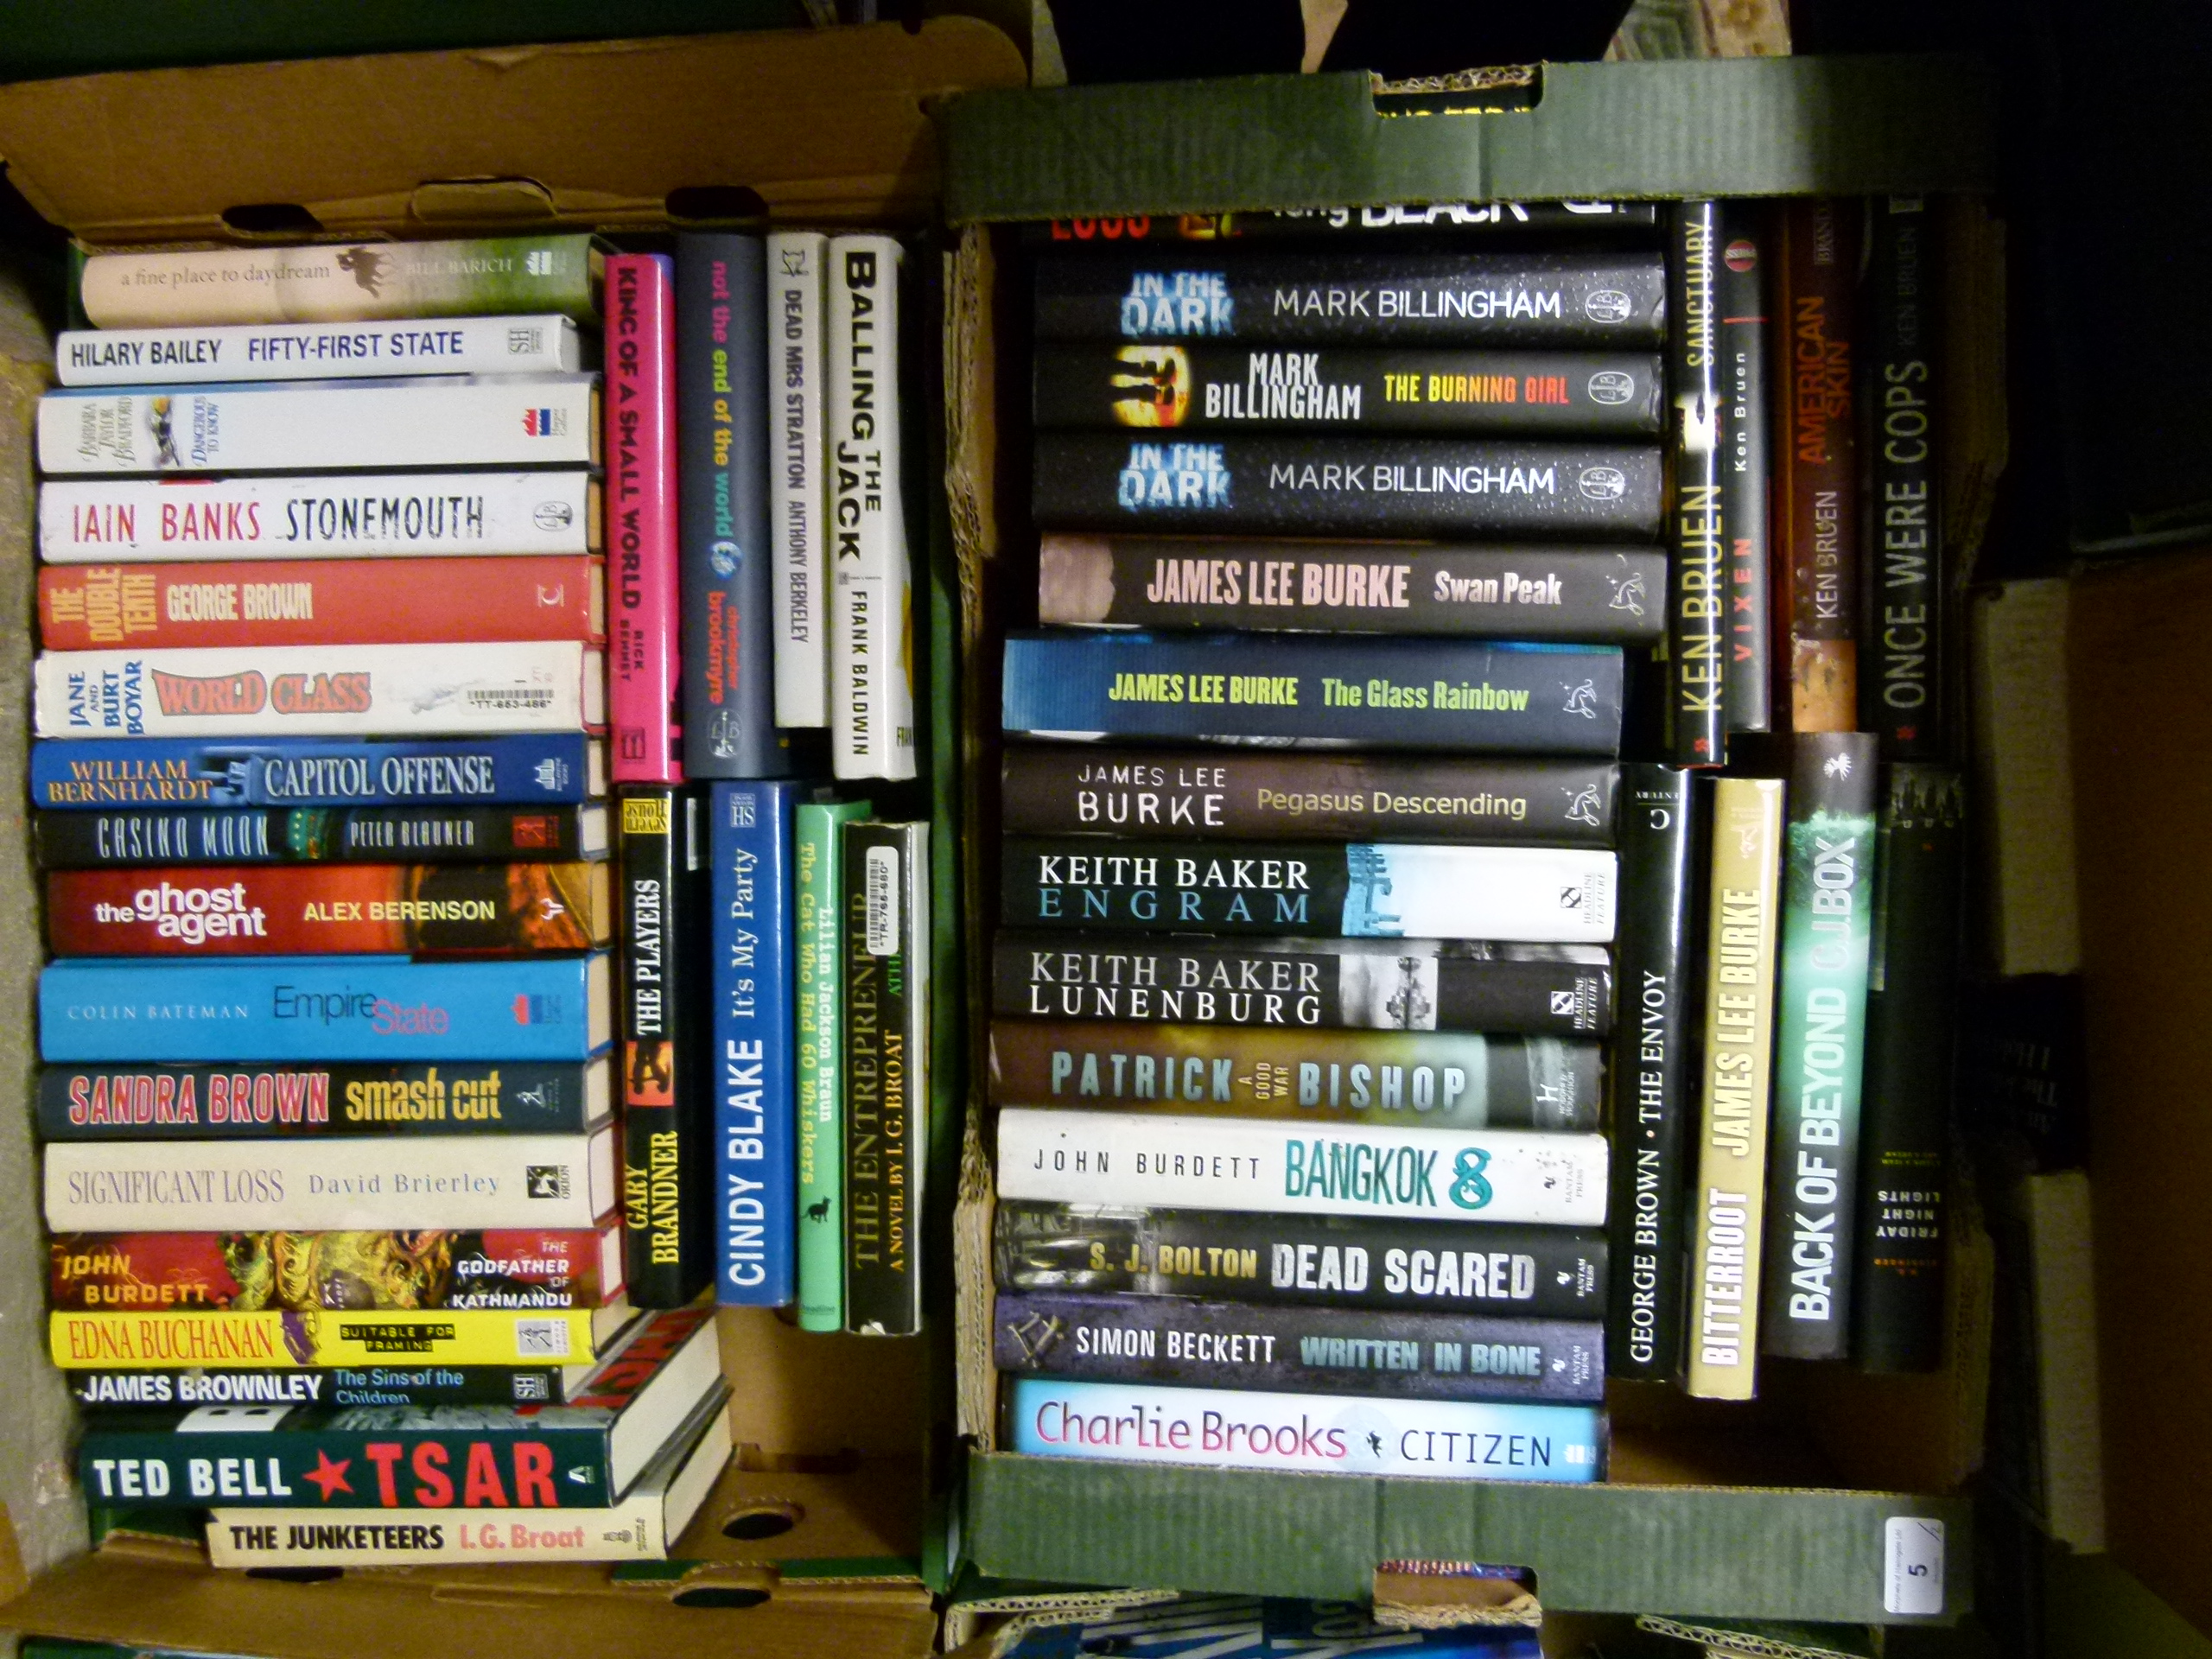 Various authors including James Lee Burke, Ken Bruen, George Brown, and others. A collection of